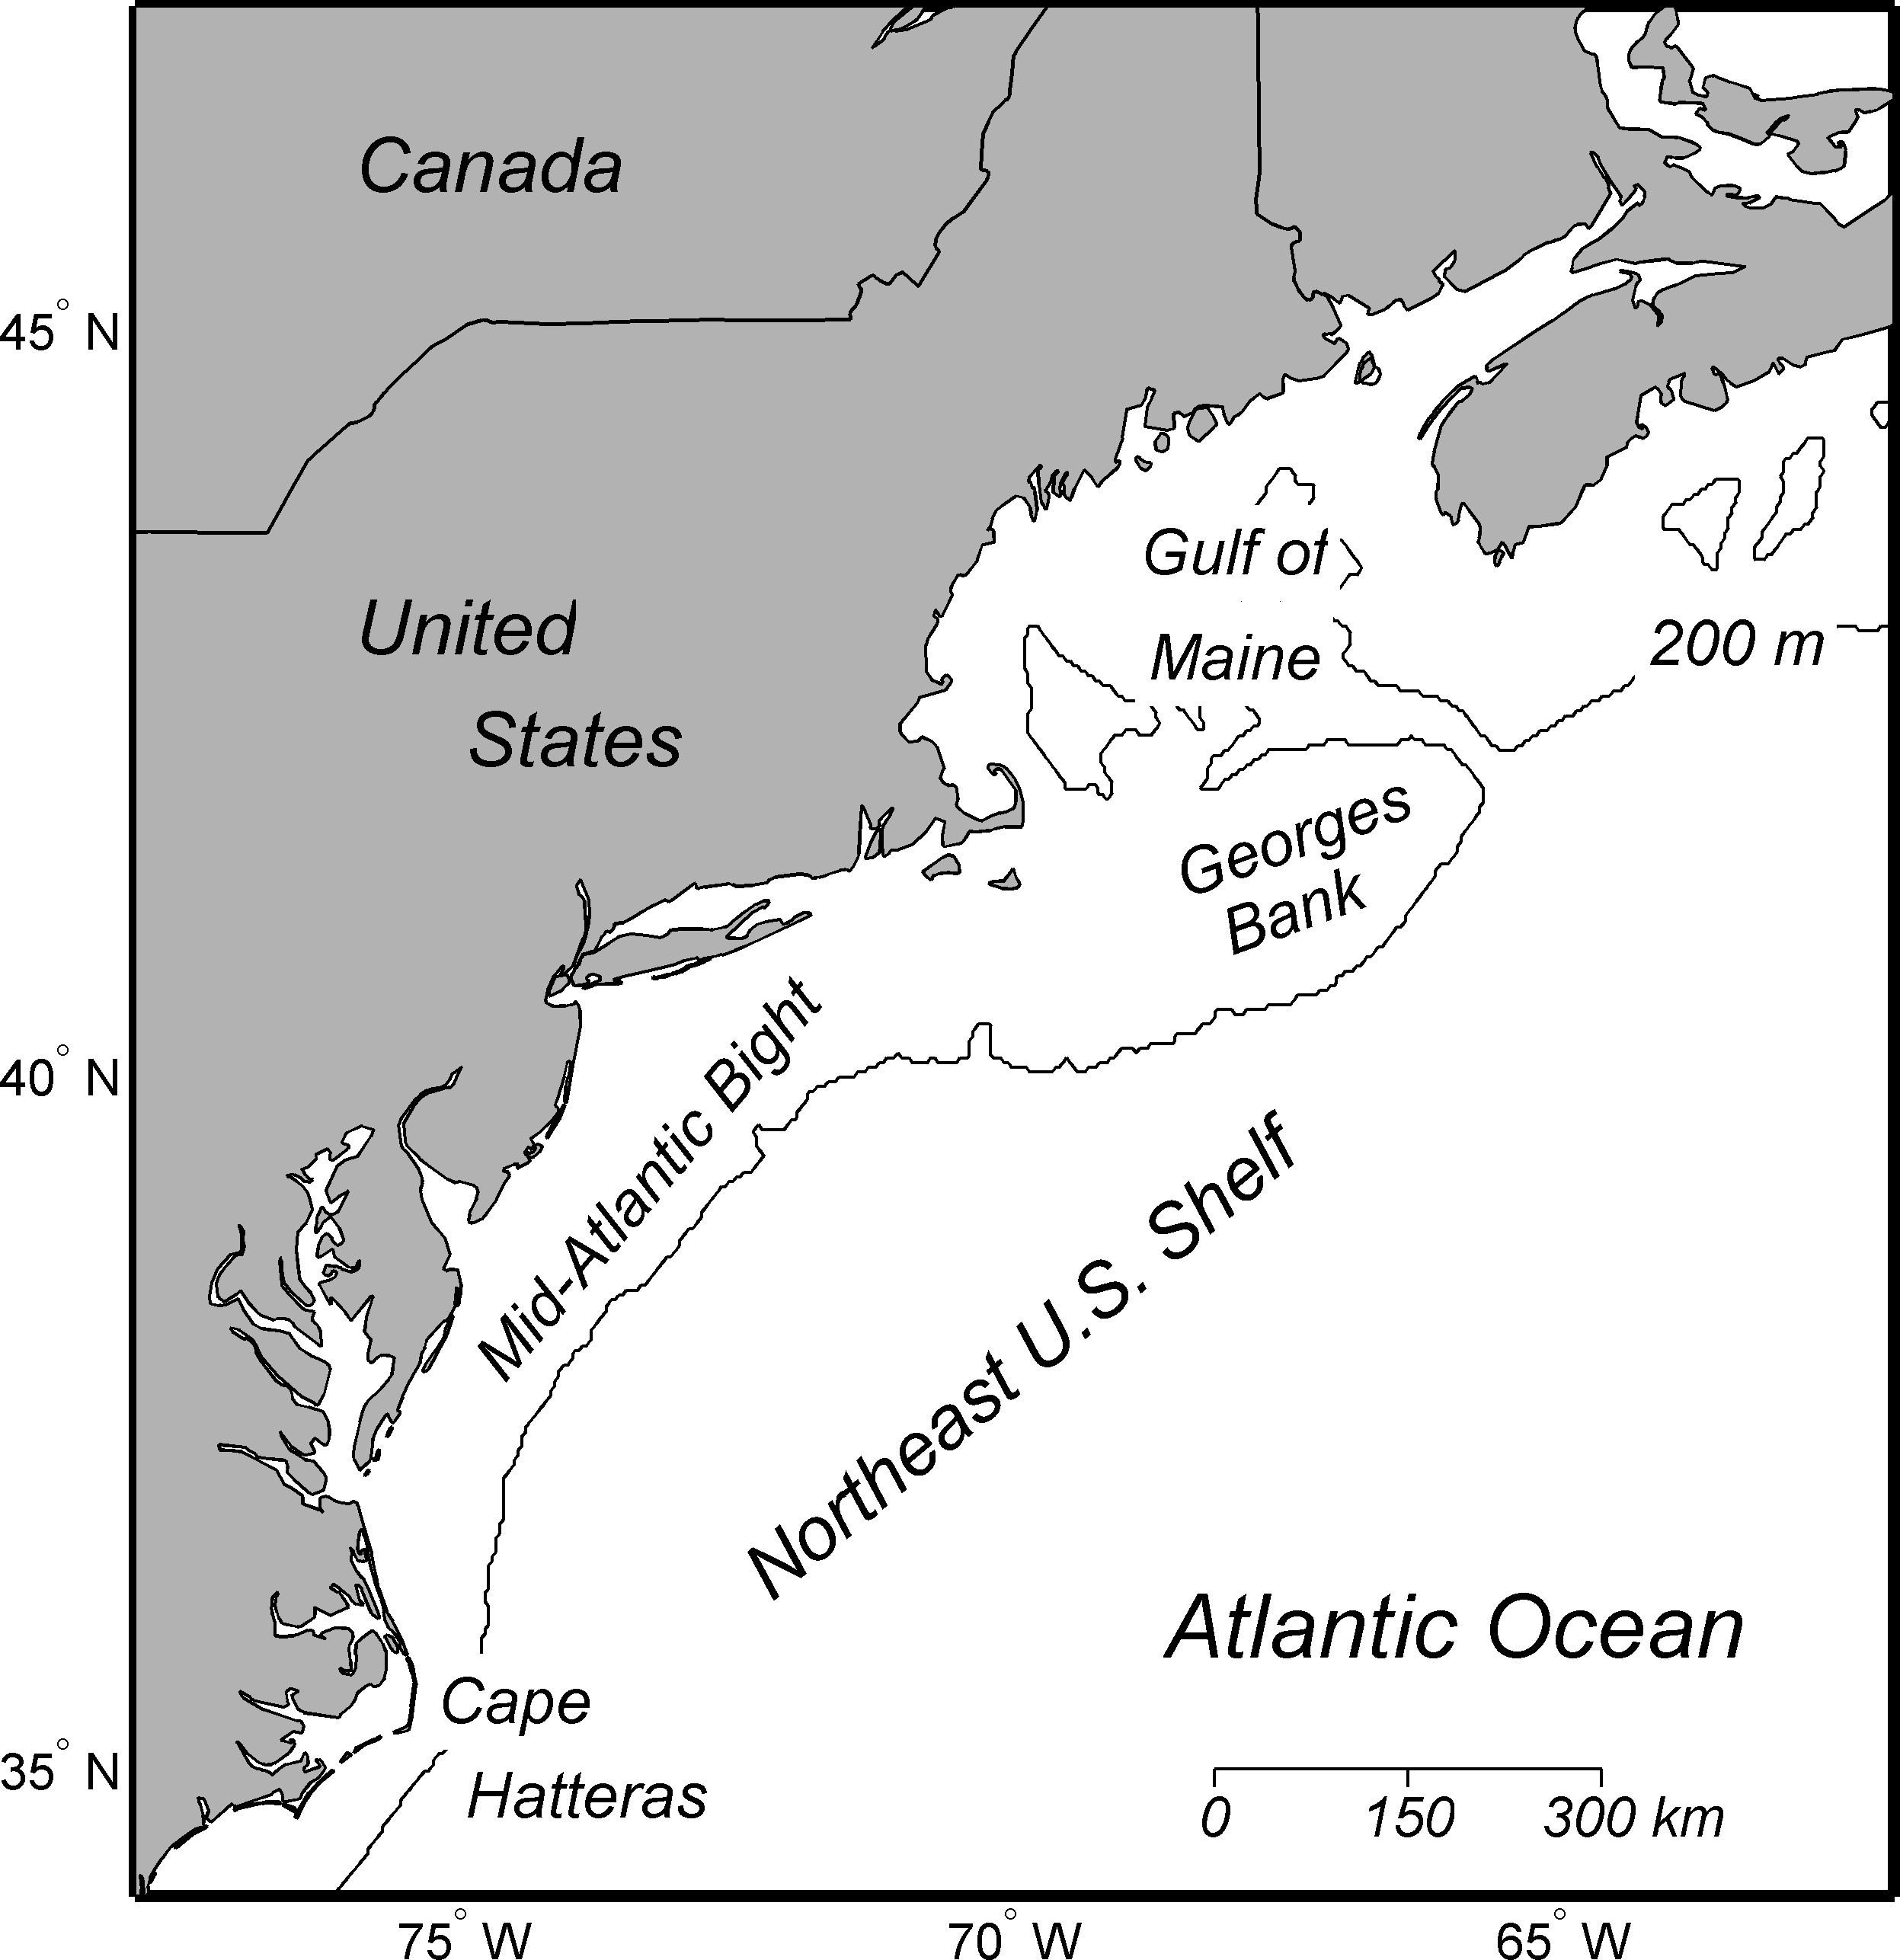 Map of Northeast U.S. Continental Shelf Large Marine Ecosystem from [1]